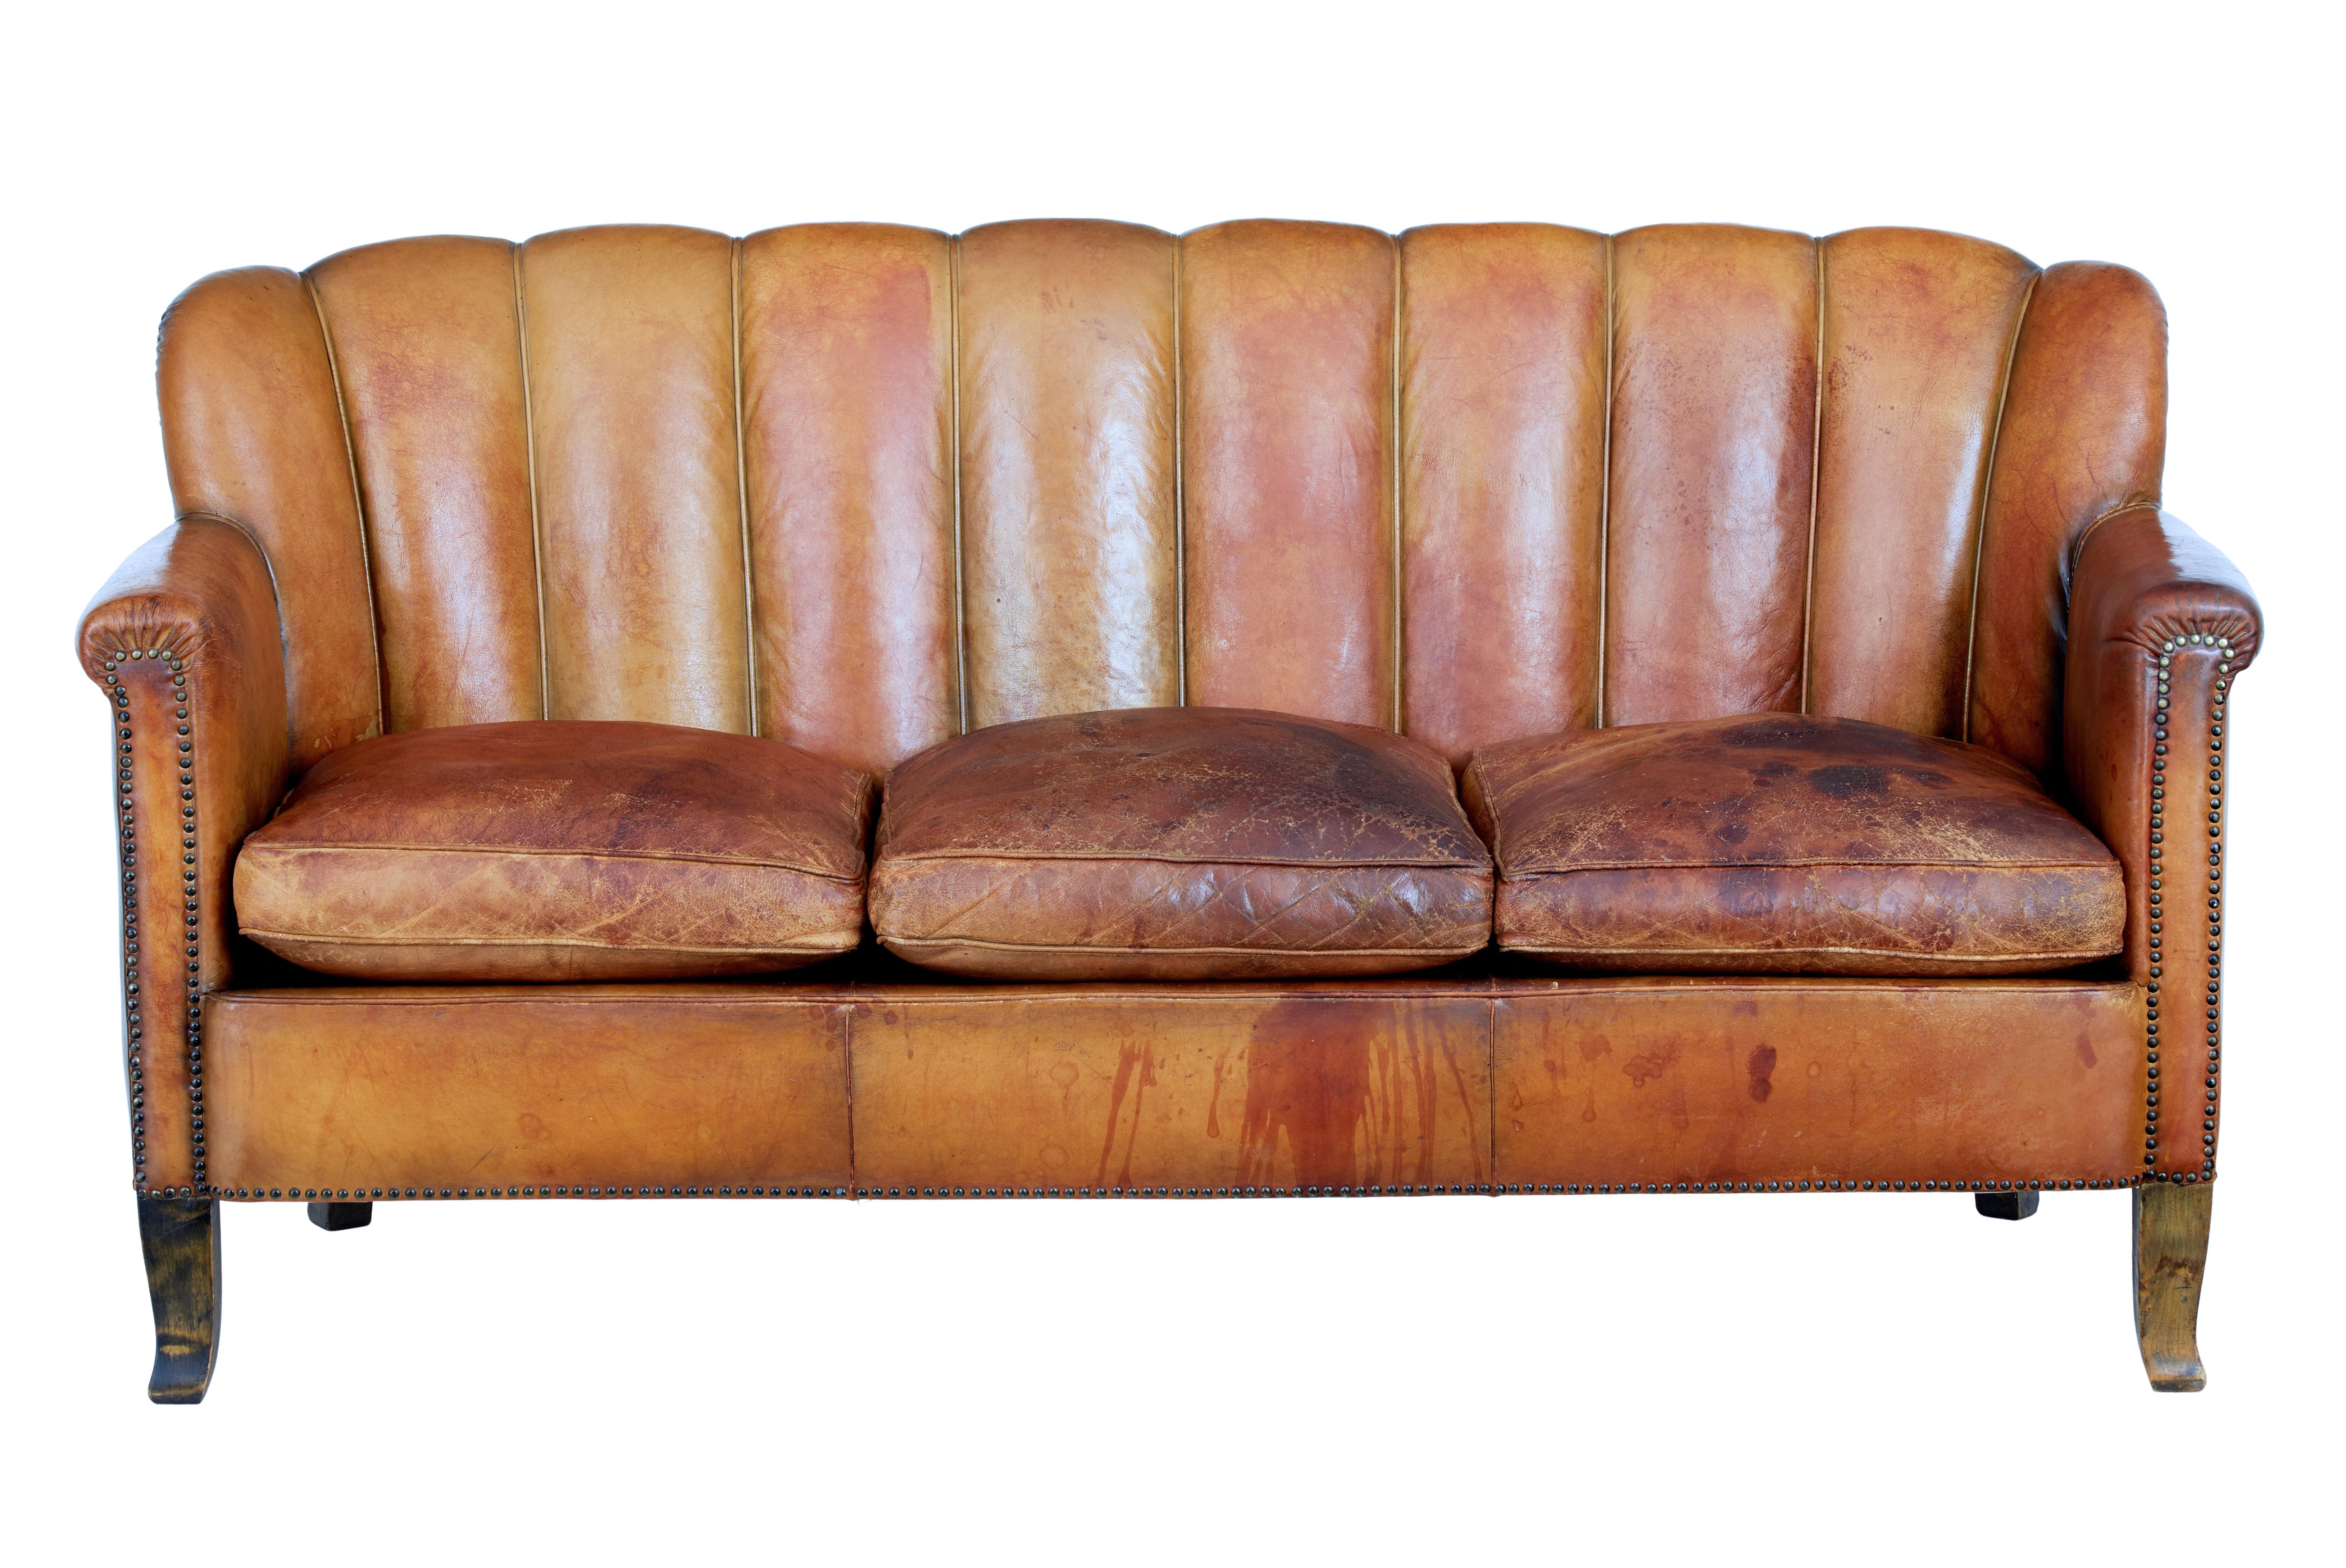 Fine quality Art Deco period 3-piece suite, circa 1920.

Suite comprises of a sofa and 2 matching armchairs. 3-seat sofa with seperate seat cushions. Shell back shaped and upholstered in original thick hide leather.

Standing on stained birch